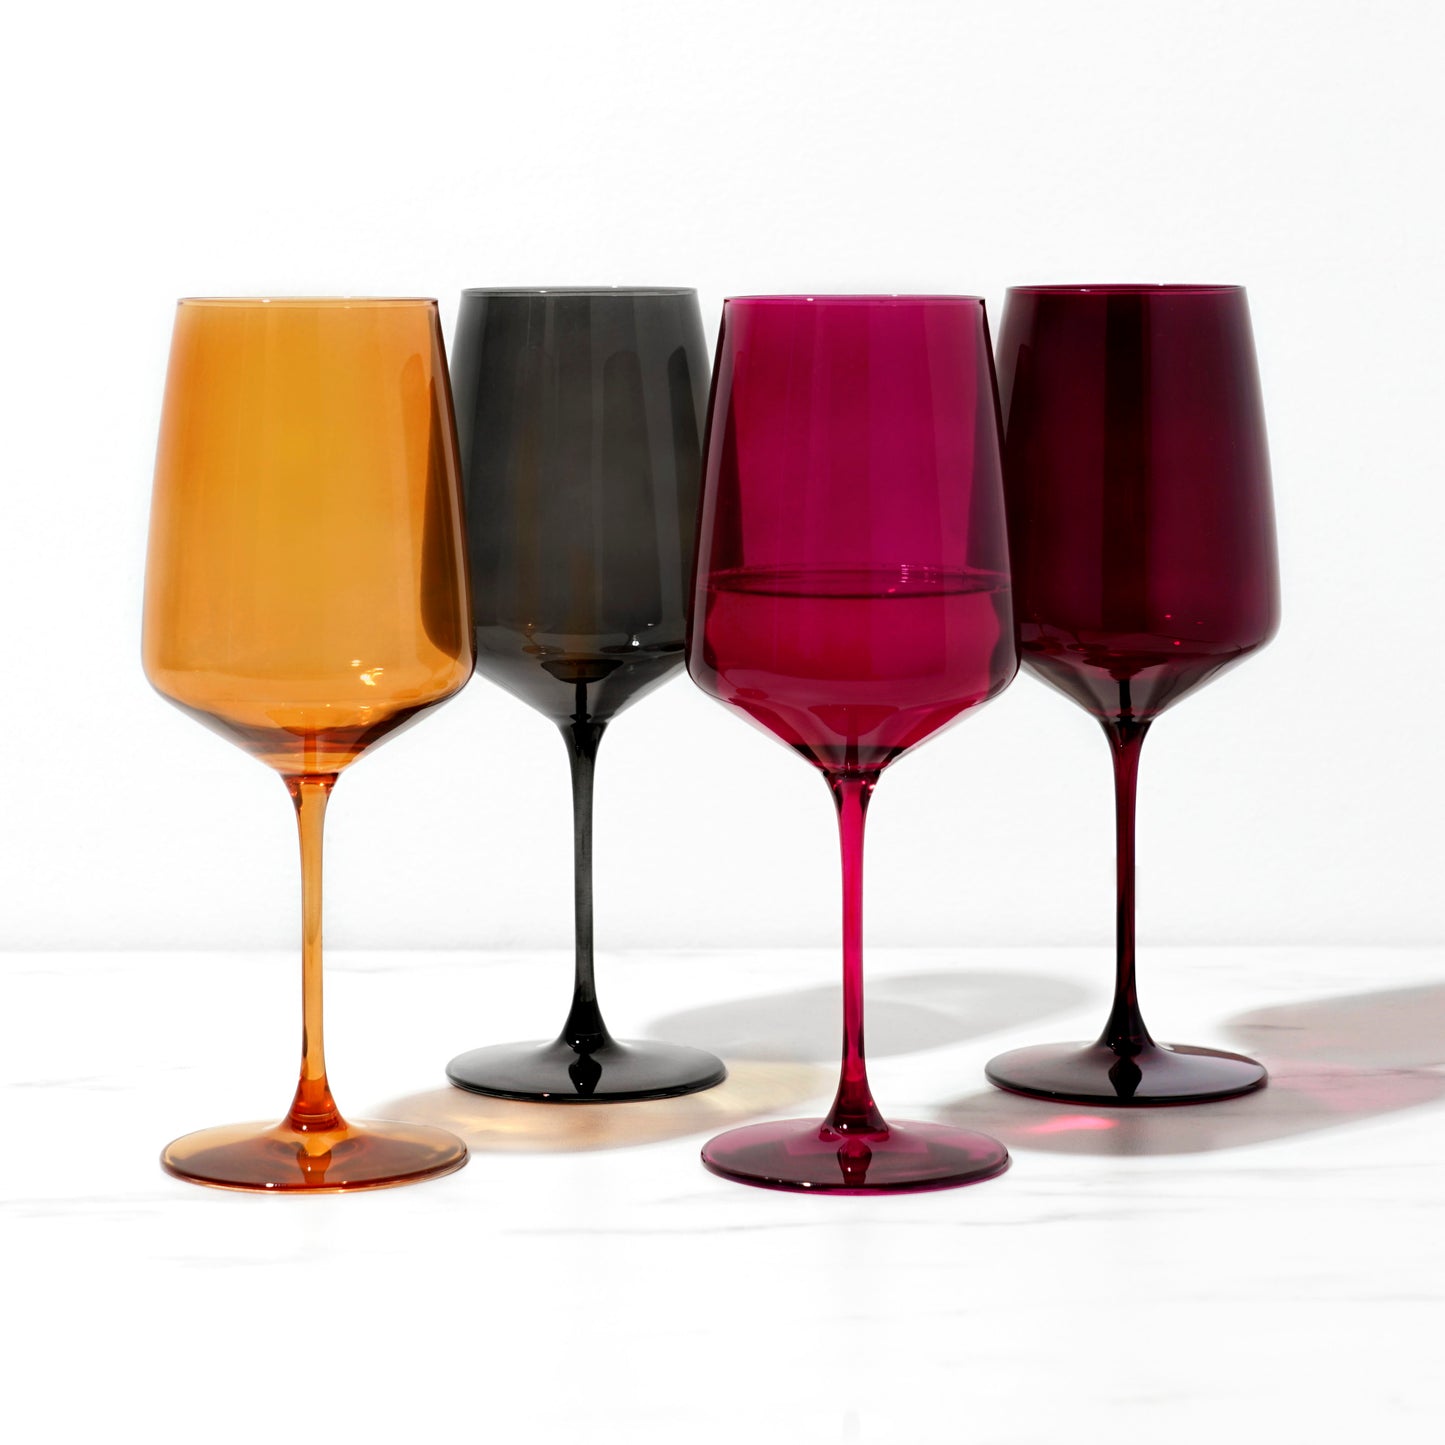 Reserve Nouveau Crystal Wine Glasses in Sunset